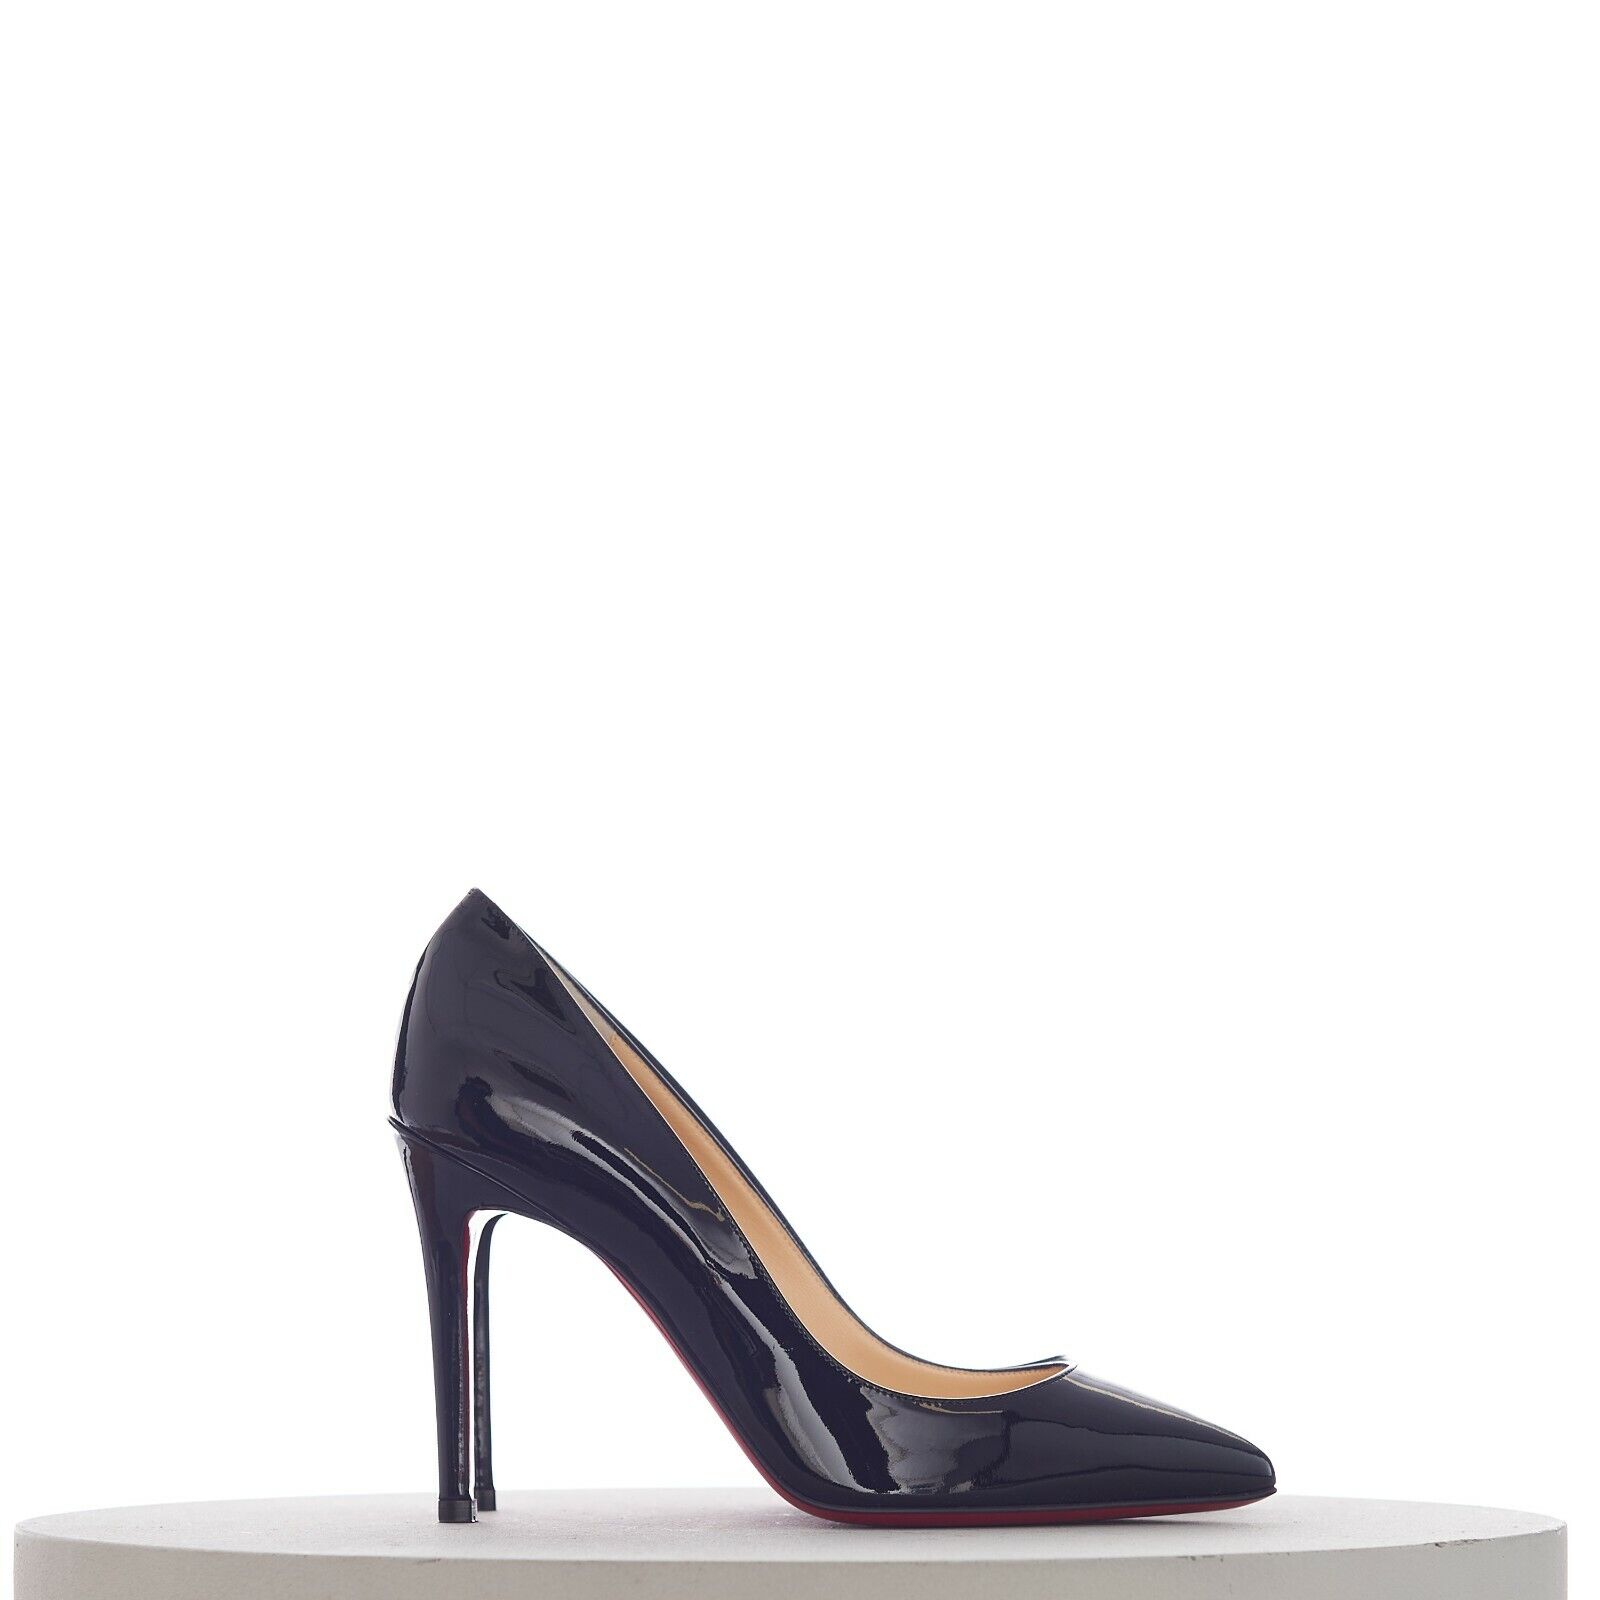 CHRISTIAN LOUBOUTIN 745$ Pigalle 100mm Pumps In Black Patent Leather